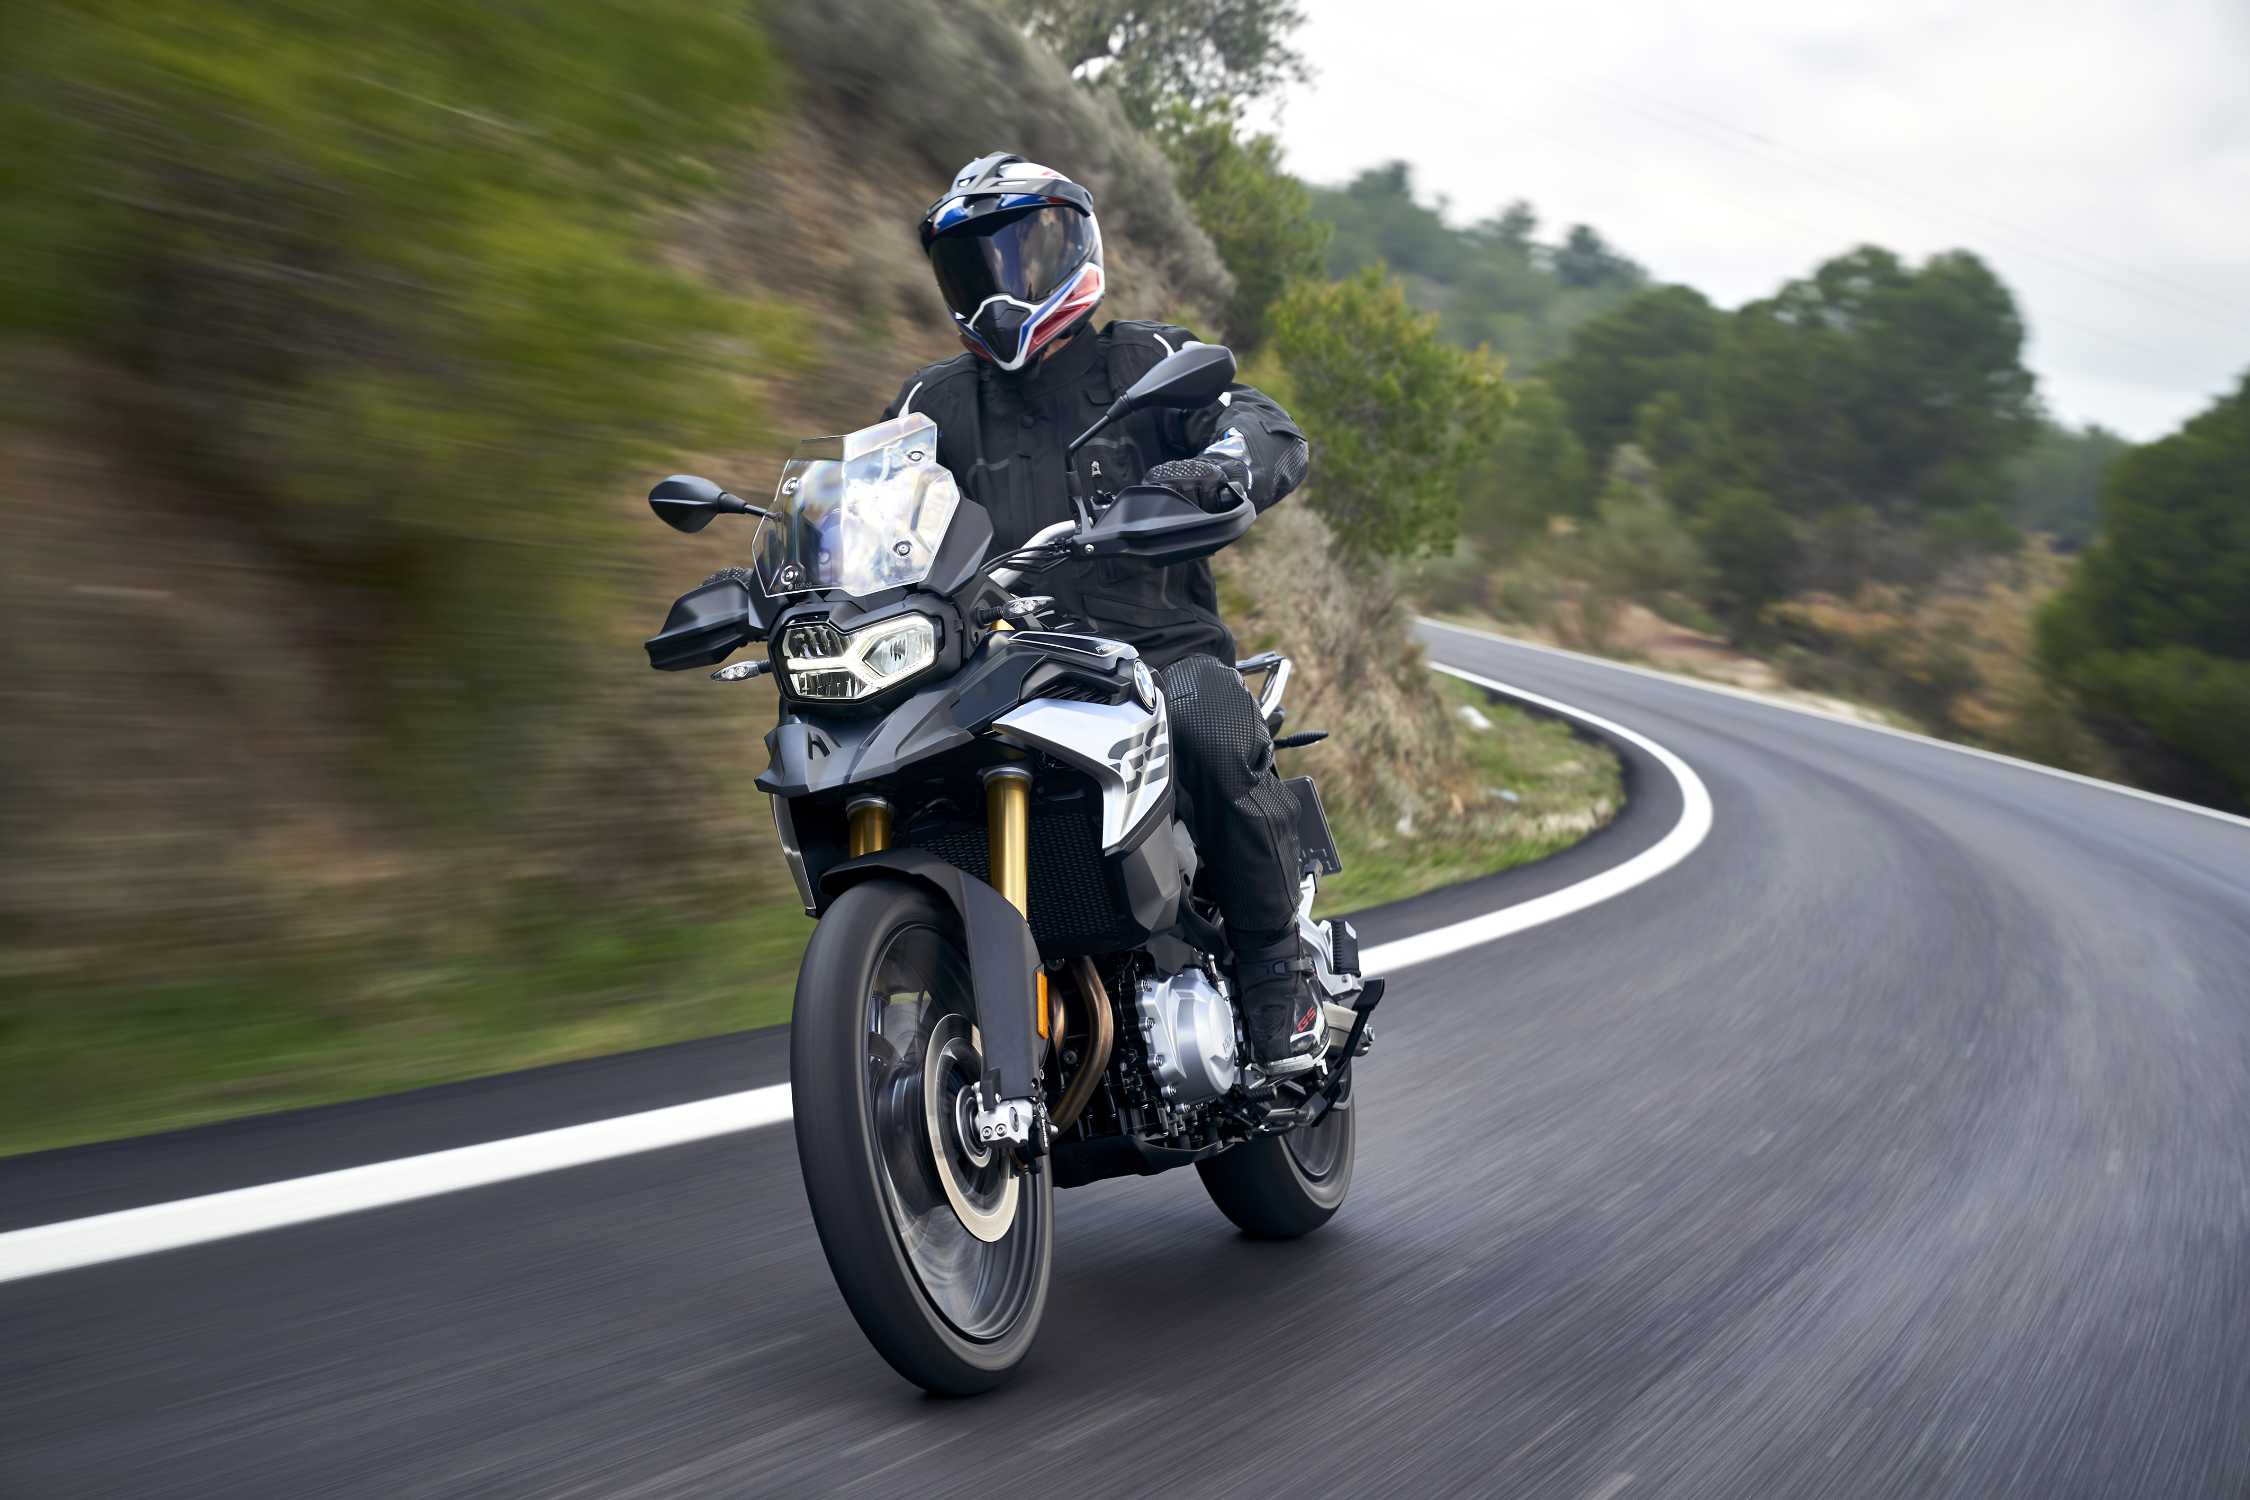 2019 bmw f 850 gs first ride review (20 fast facts)